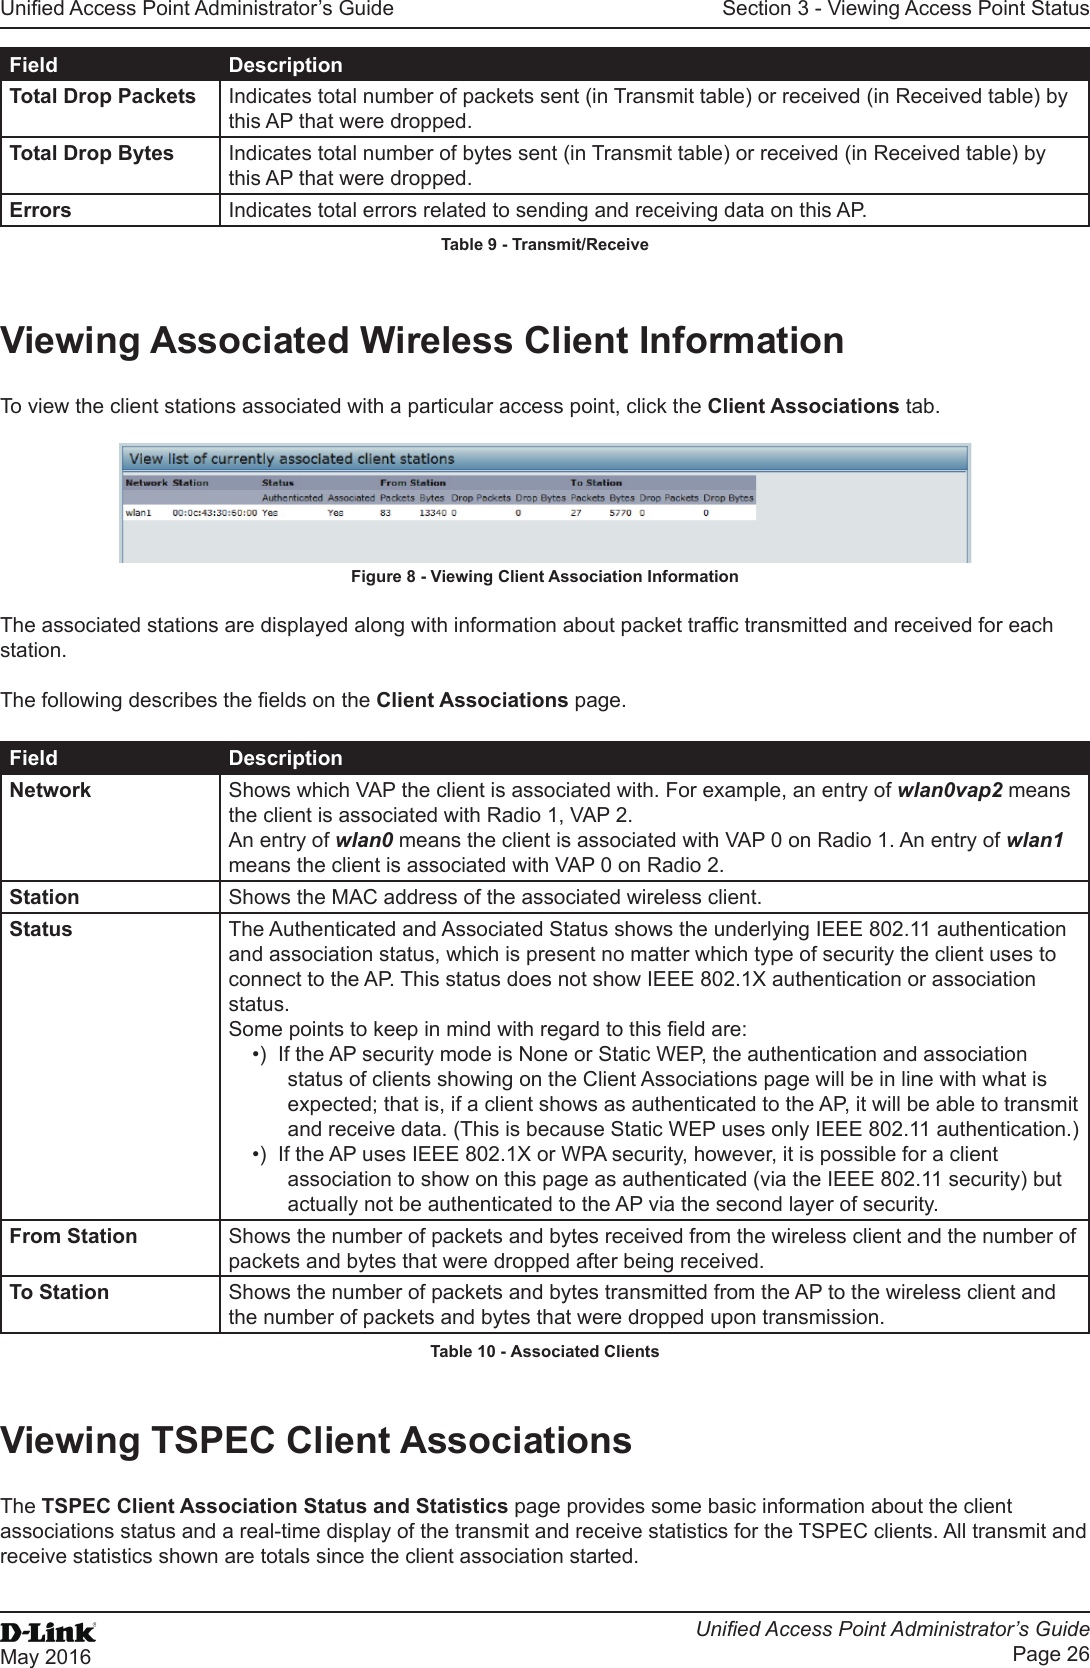 Unied Access Point Administrator’s GuideUnied Access Point Administrator’s GuidePage 26May 2016Section 3 - Viewing Access Point StatusField DescriptionTotal Drop Packets Indicates total number of packets sent (in Transmit table) or received (in Received table) by this AP that were dropped.Total Drop Bytes Indicates total number of bytes sent (in Transmit table) or received (in Received table) by this AP that were dropped.Errors Indicates total errors related to sending and receiving data on this AP.Table 9 - Transmit/ReceiveViewing Associated Wireless Client InformationTo view the client stations associated with a particular access point, click the Client Associations tab.Figure 8 - Viewing Client Association InformationThe associated stations are displayed along with information about packet trafc transmitted and received for each station.The following describes the elds on the Client Associations page.Field DescriptionNetwork Shows which VAP the client is associated with. For example, an entry of wlan0vap2 means the client is associated with Radio 1, VAP 2.An entry of wlan0 means the client is associated with VAP 0 on Radio 1. An entry of wlan1 means the client is associated with VAP 0 on Radio 2.Station Shows the MAC address of the associated wireless client.Status The Authenticated and Associated Status shows the underlying IEEE 802.11 authentication and association status, which is present no matter which type of security the client uses to connect to the AP. This status does not show IEEE 802.1X authentication or association status. Some points to keep in mind with regard to this eld are: •)  If the AP security mode is None or Static WEP, the authentication and association status of clients showing on the Client Associations page will be in line with what is expected; that is, if a client shows as authenticated to the AP, it will be able to transmit and receive data. (This is because Static WEP uses only IEEE 802.11 authentication.) •)  If the AP uses IEEE 802.1X or WPA security, however, it is possible for a client association to show on this page as authenticated (via the IEEE 802.11 security) but actually not be authenticated to the AP via the second layer of security.From Station Shows the number of packets and bytes received from the wireless client and the number of packets and bytes that were dropped after being received.To Station Shows the number of packets and bytes transmitted from the AP to the wireless client and the number of packets and bytes that were dropped upon transmission.Table 10 - Associated ClientsViewing TSPEC Client AssociationsThe TSPEC Client Association Status and Statistics page provides some basic information about the client associations status and a real-time display of the transmit and receive statistics for the TSPEC clients. All transmit and receive statistics shown are totals since the client association started.